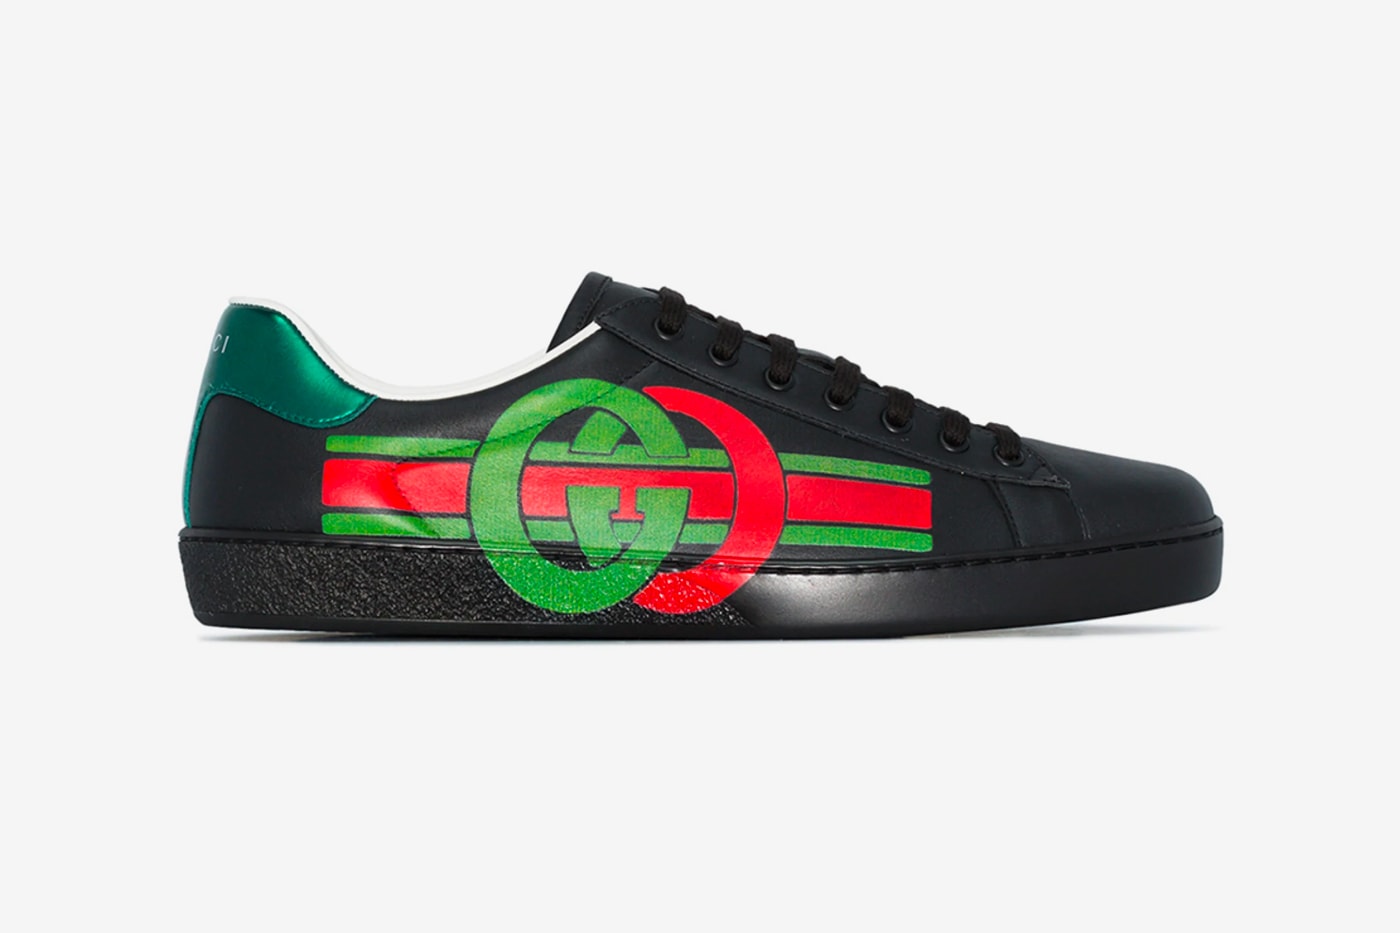 How to Style Gucci Ace Sneakers, Gucci Outfits